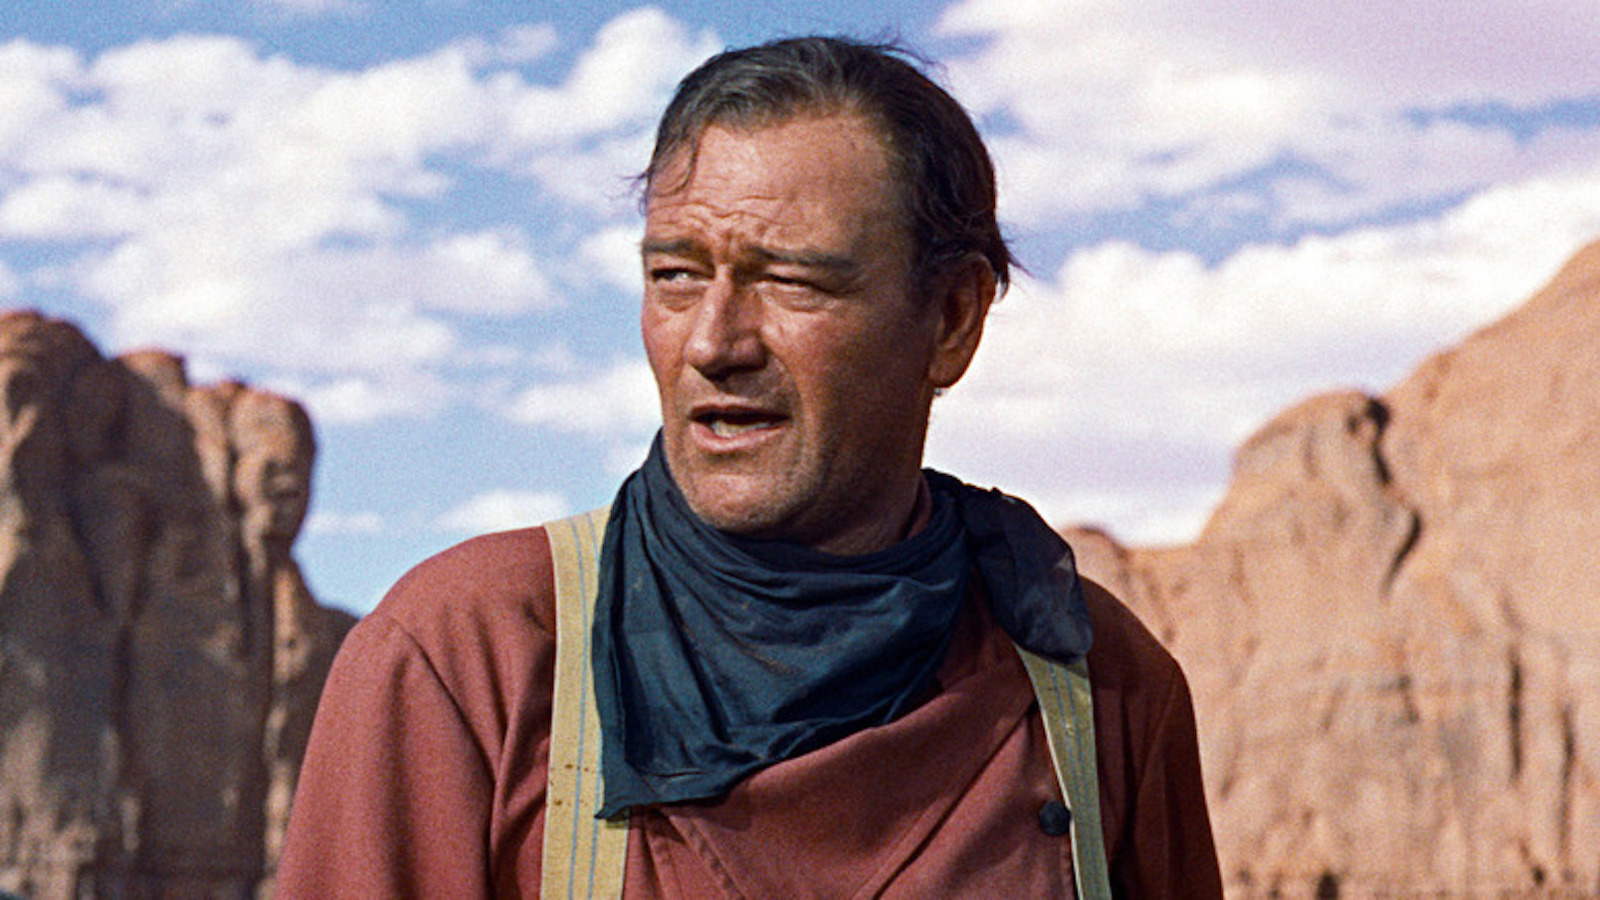 John Ford's claim to "discover" Monument Valley did not sit well with John Wayne